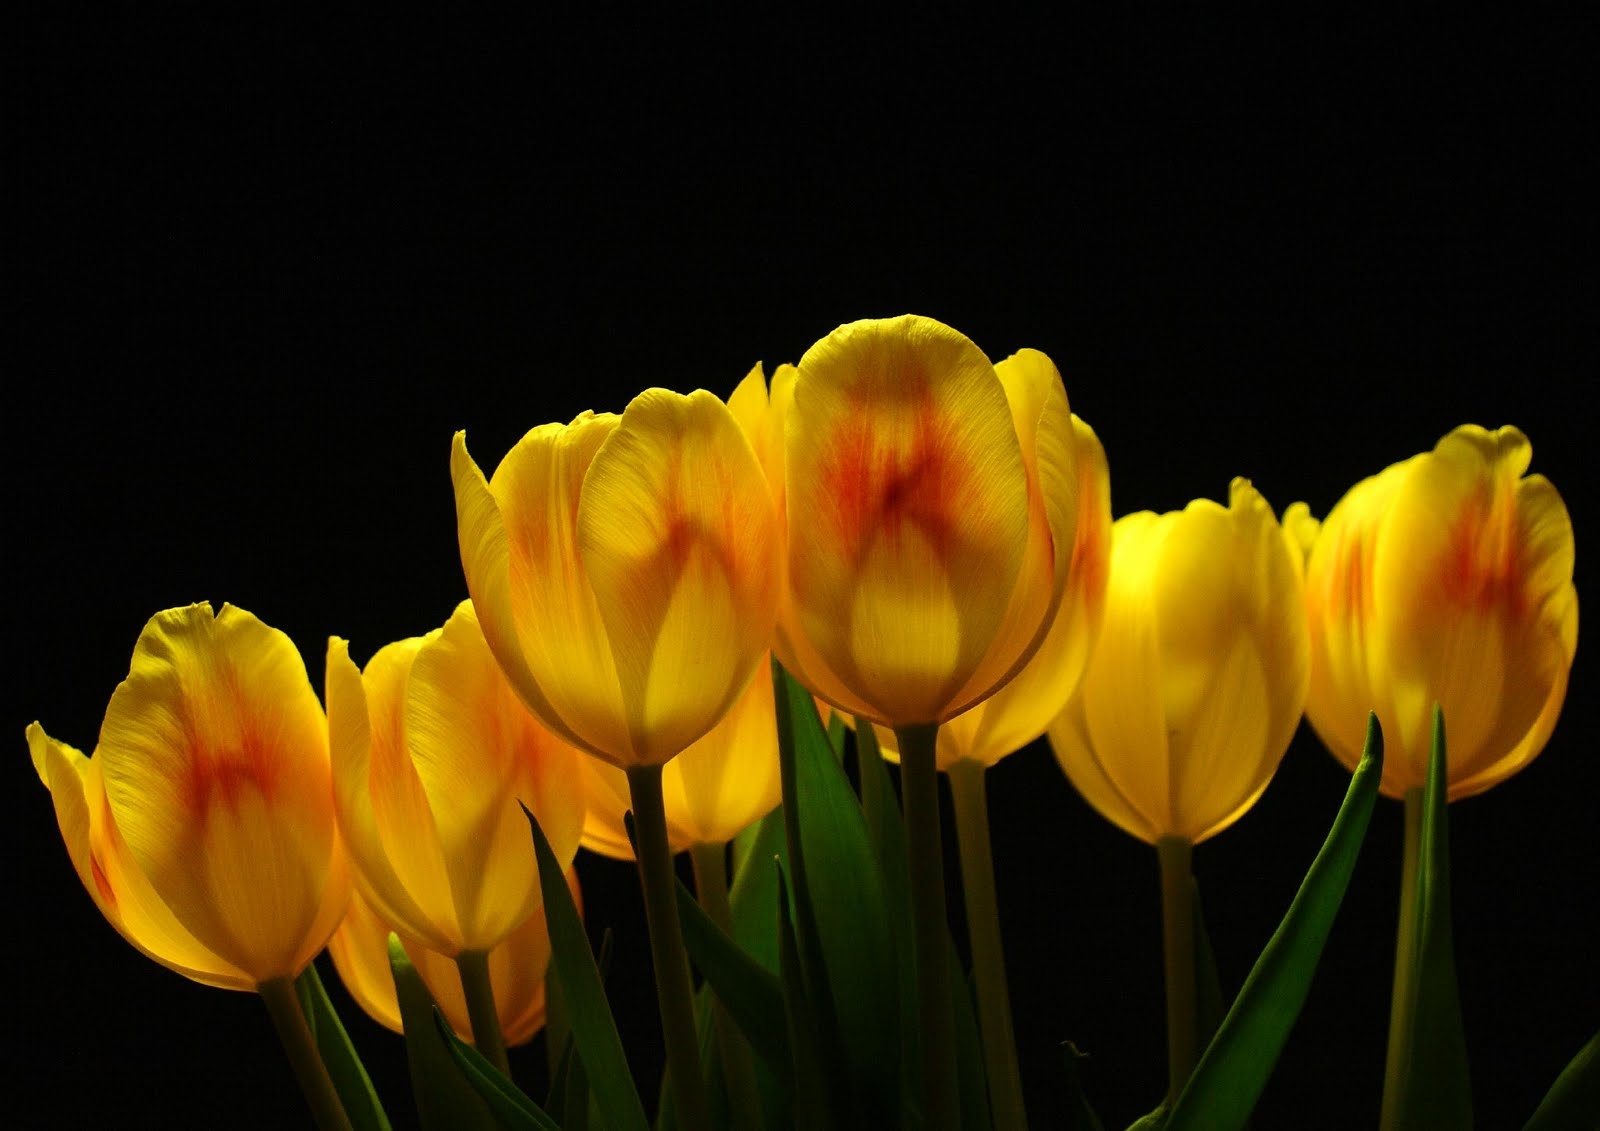 A vase of yellow flowers in front on black background - Tulip